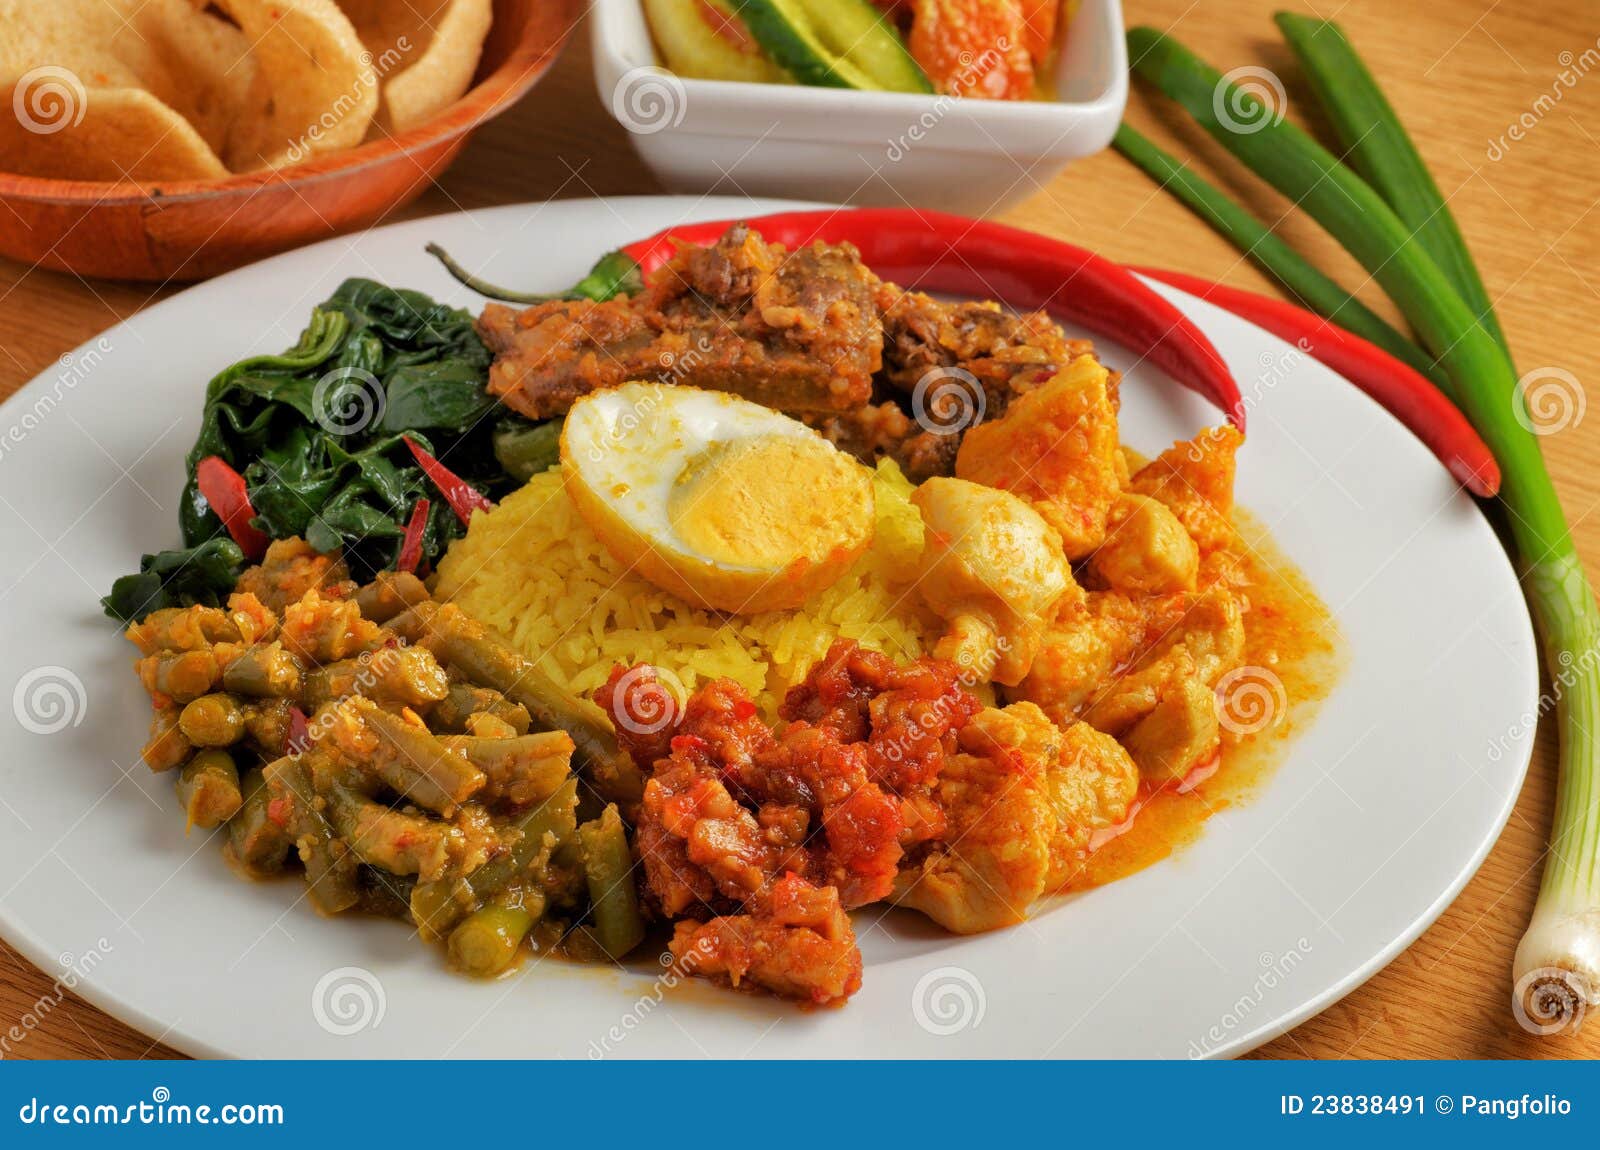 plate of indonesian food